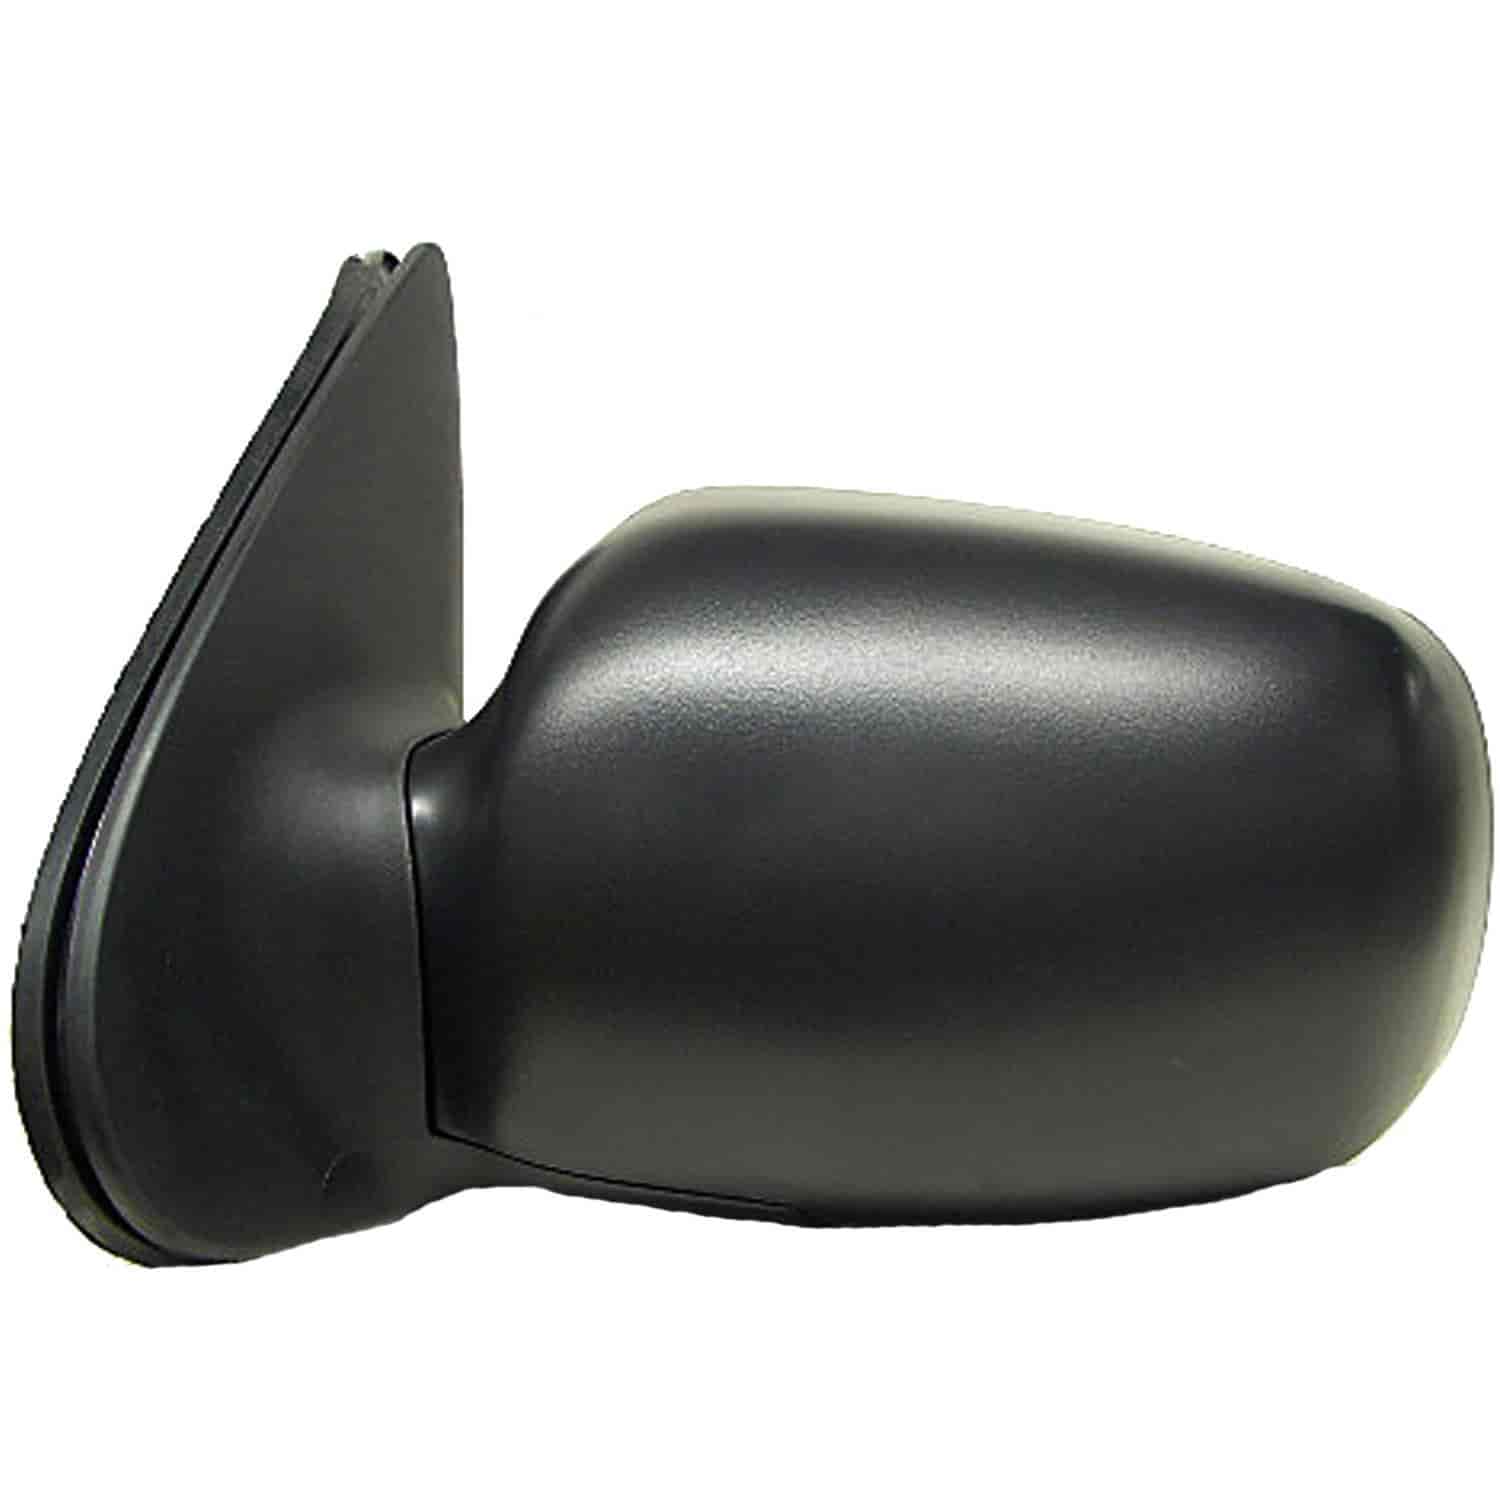 Side View Mirror - Left Manual